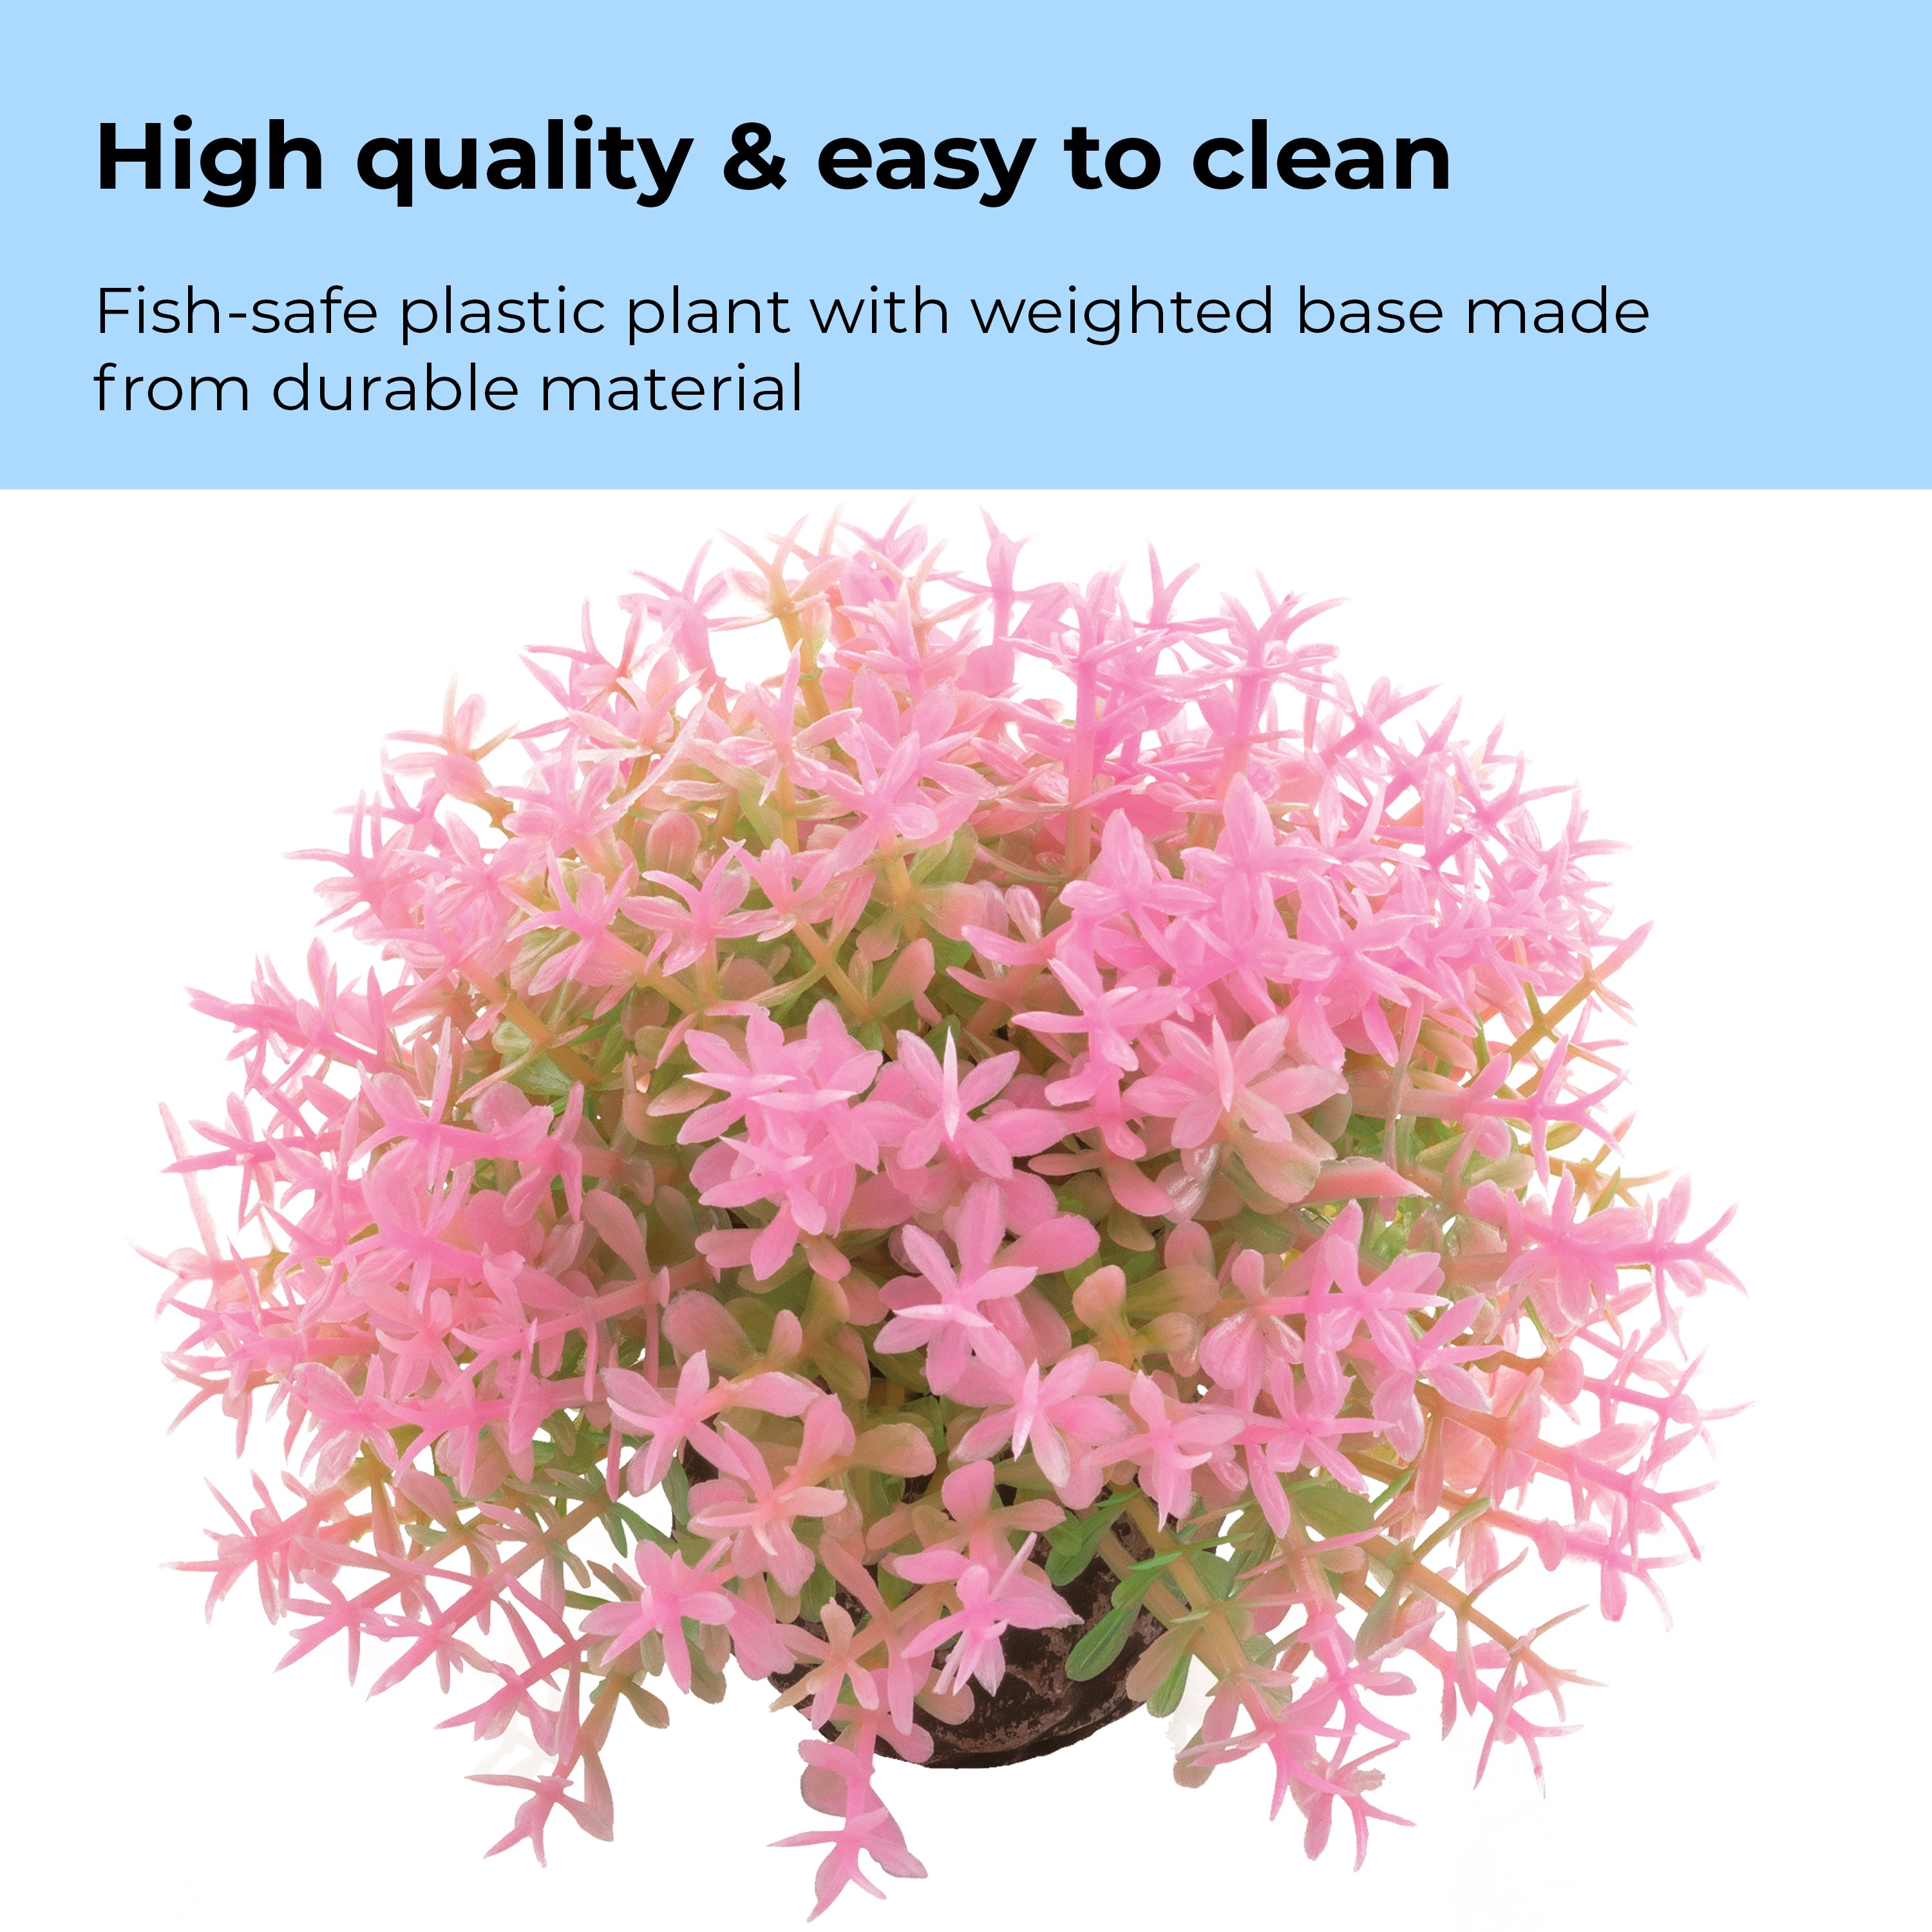 Flower Ball - High quality & easy to clean